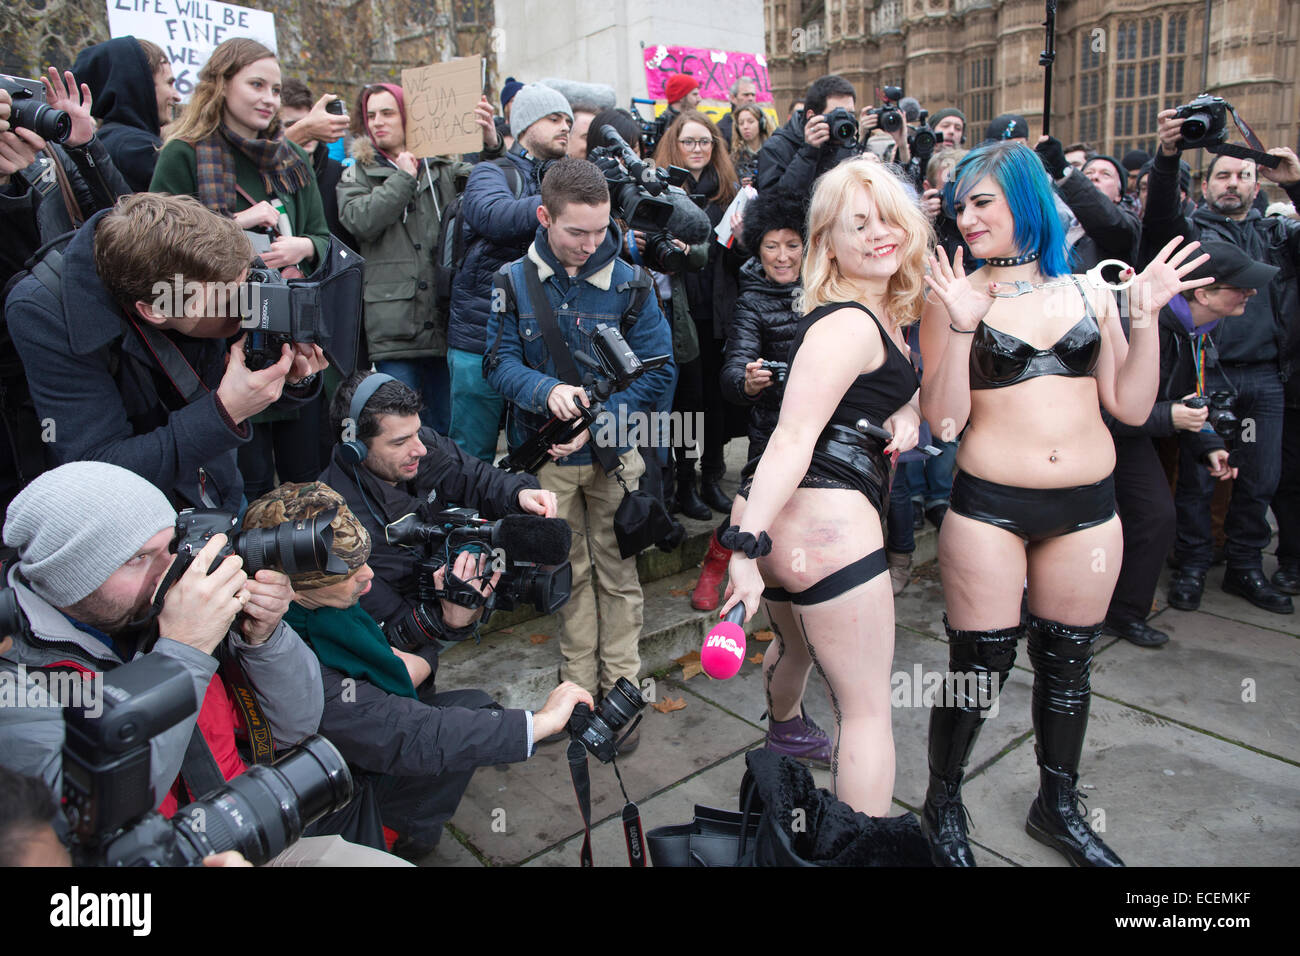 London, UK. 12th December, 2014. Porn Censorship Protest at Houses of  Parliament, London, UK 12.12.2014 Picture shows demonstrators against new  censorship legislation banning several sex acts from online pornographic  videos filmed in